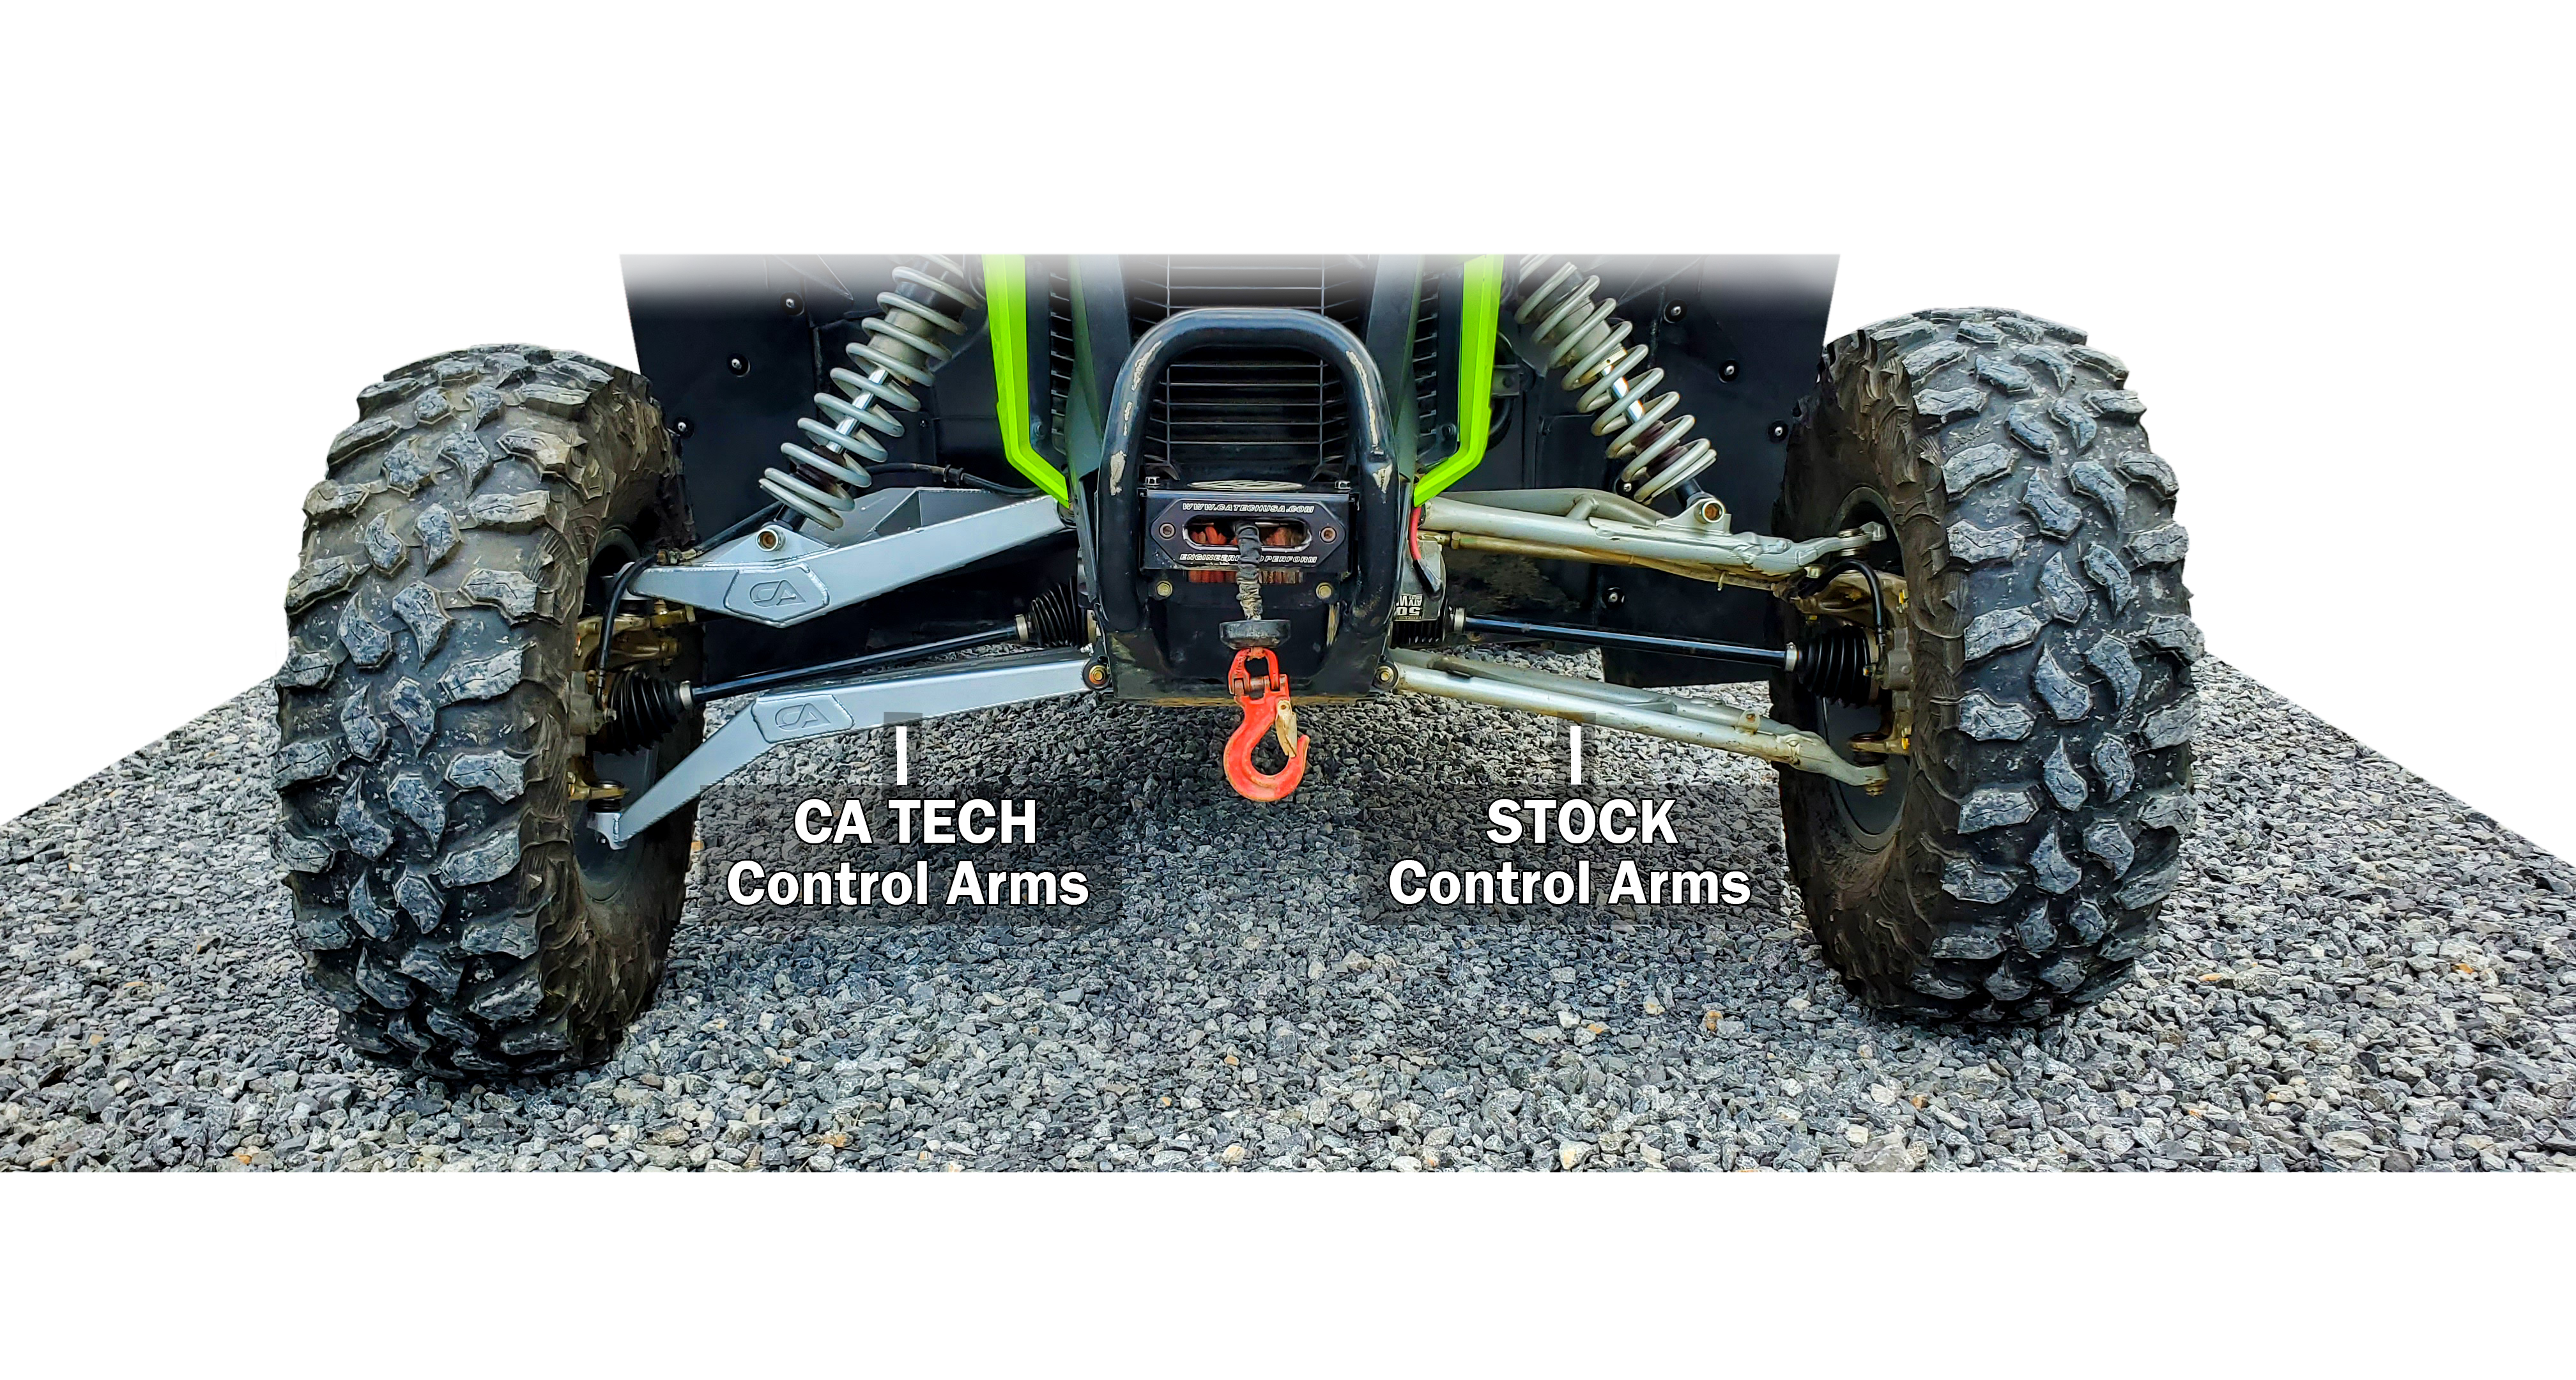 Our control arms are laser cut from 4130 chromoly then CNC broke for extremely high quality and accuracy. We've meticulously designed our control arms to be a problem solving bullet proof solution for your Talon. Our arms solve all the common and weak points that typically cause failures on OEM arms. Control arms come with bushings pre-installed.